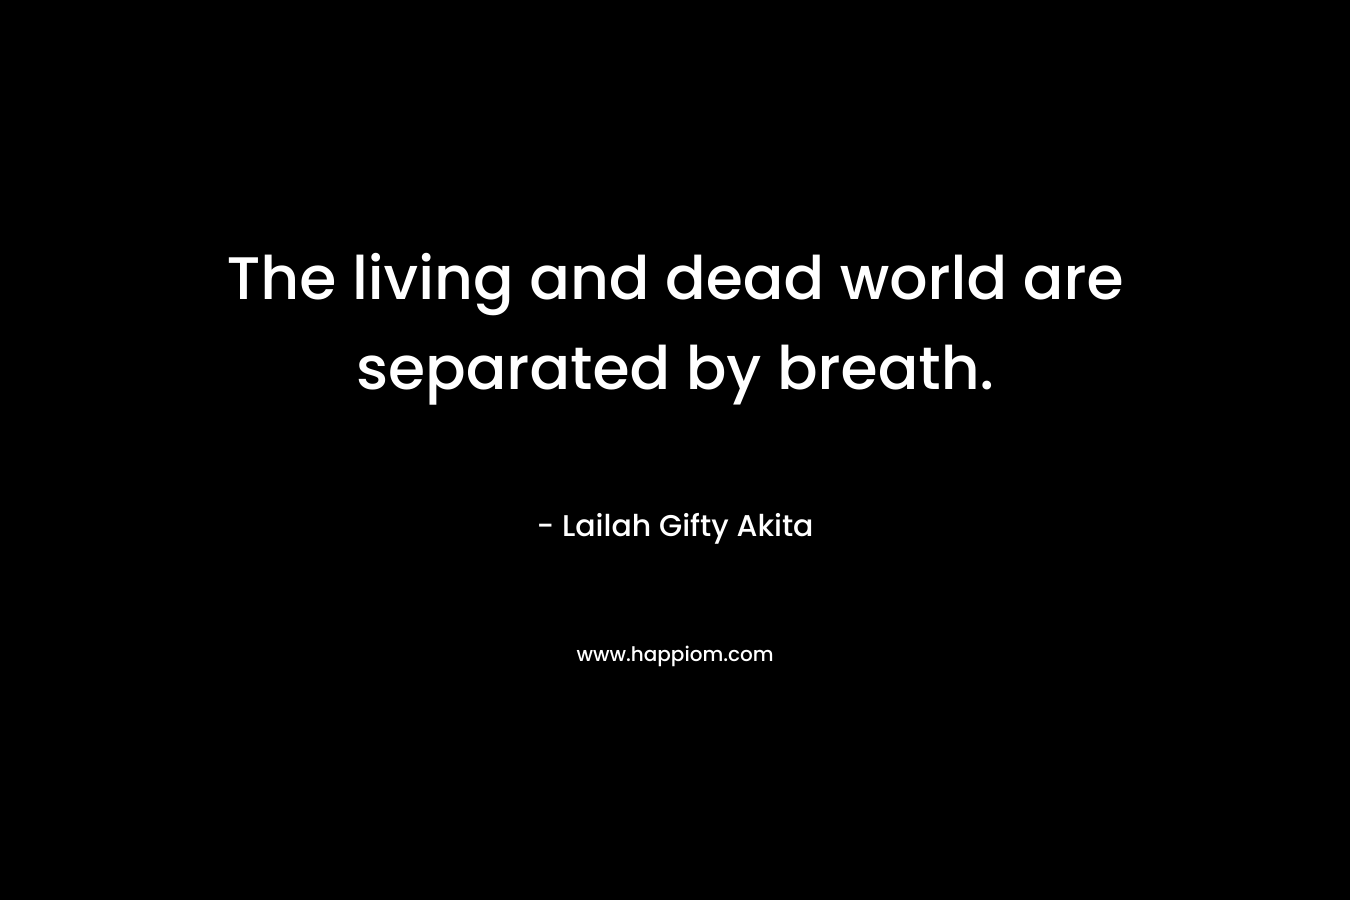 The living and dead world are separated by breath. – Lailah Gifty Akita